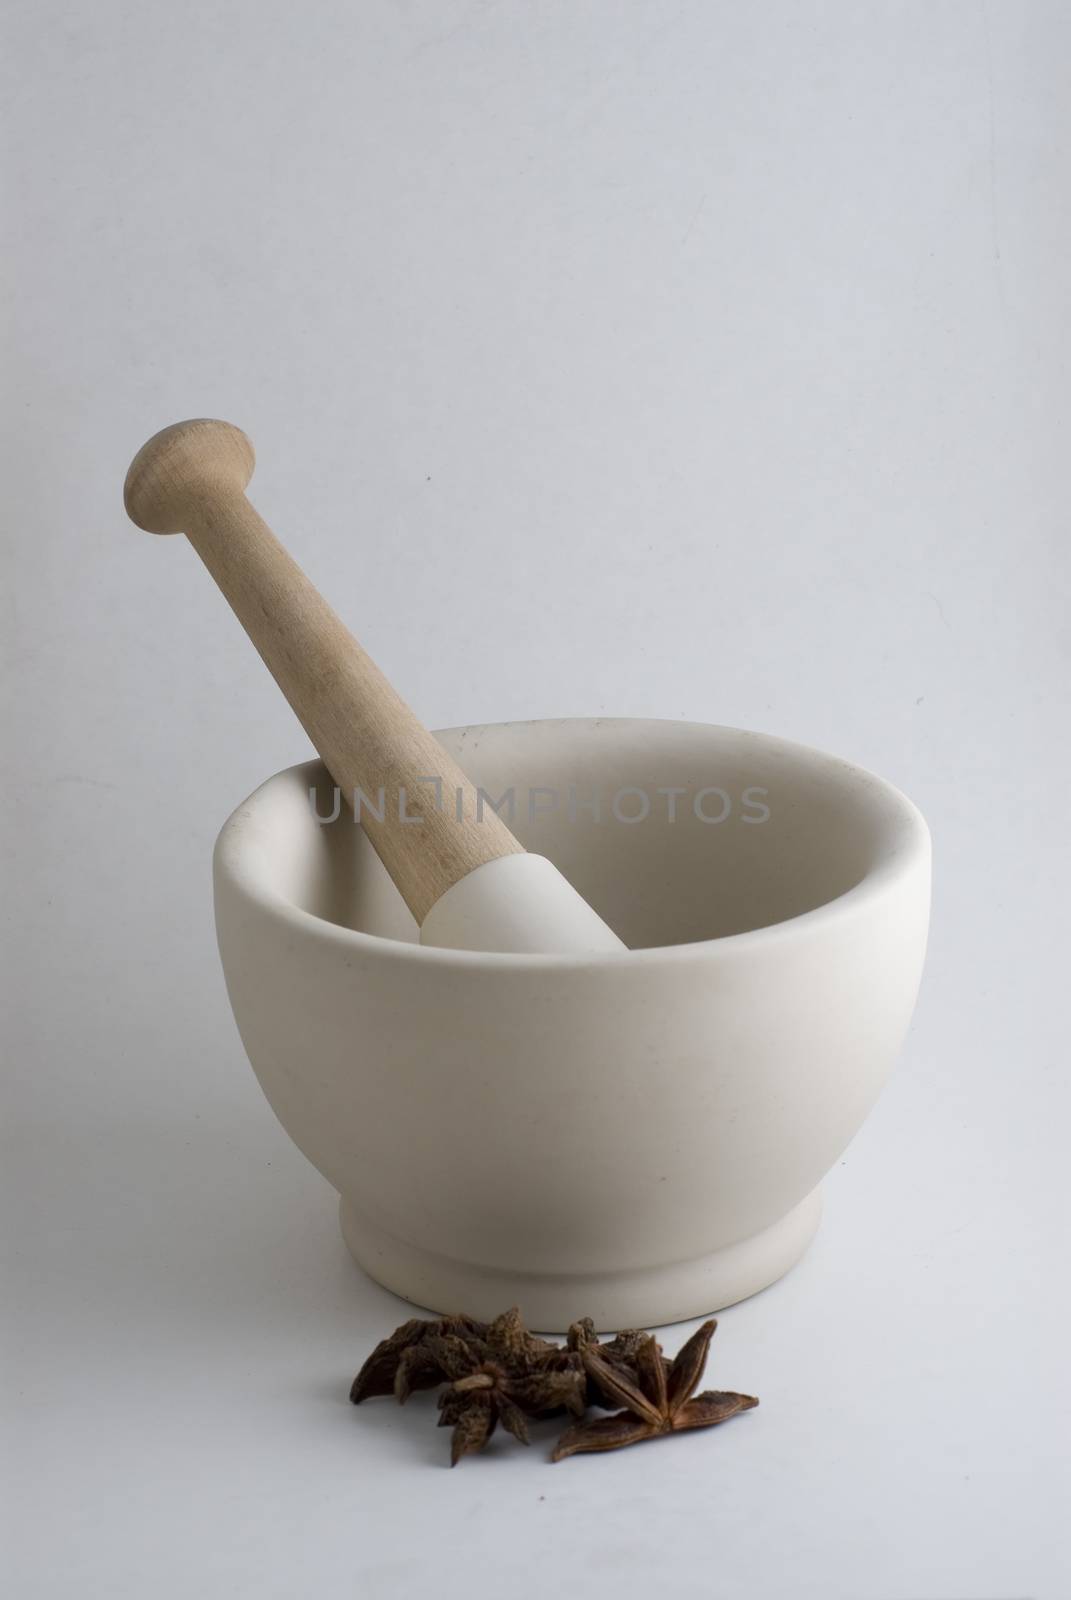 Pestle and Mortar by seawaters